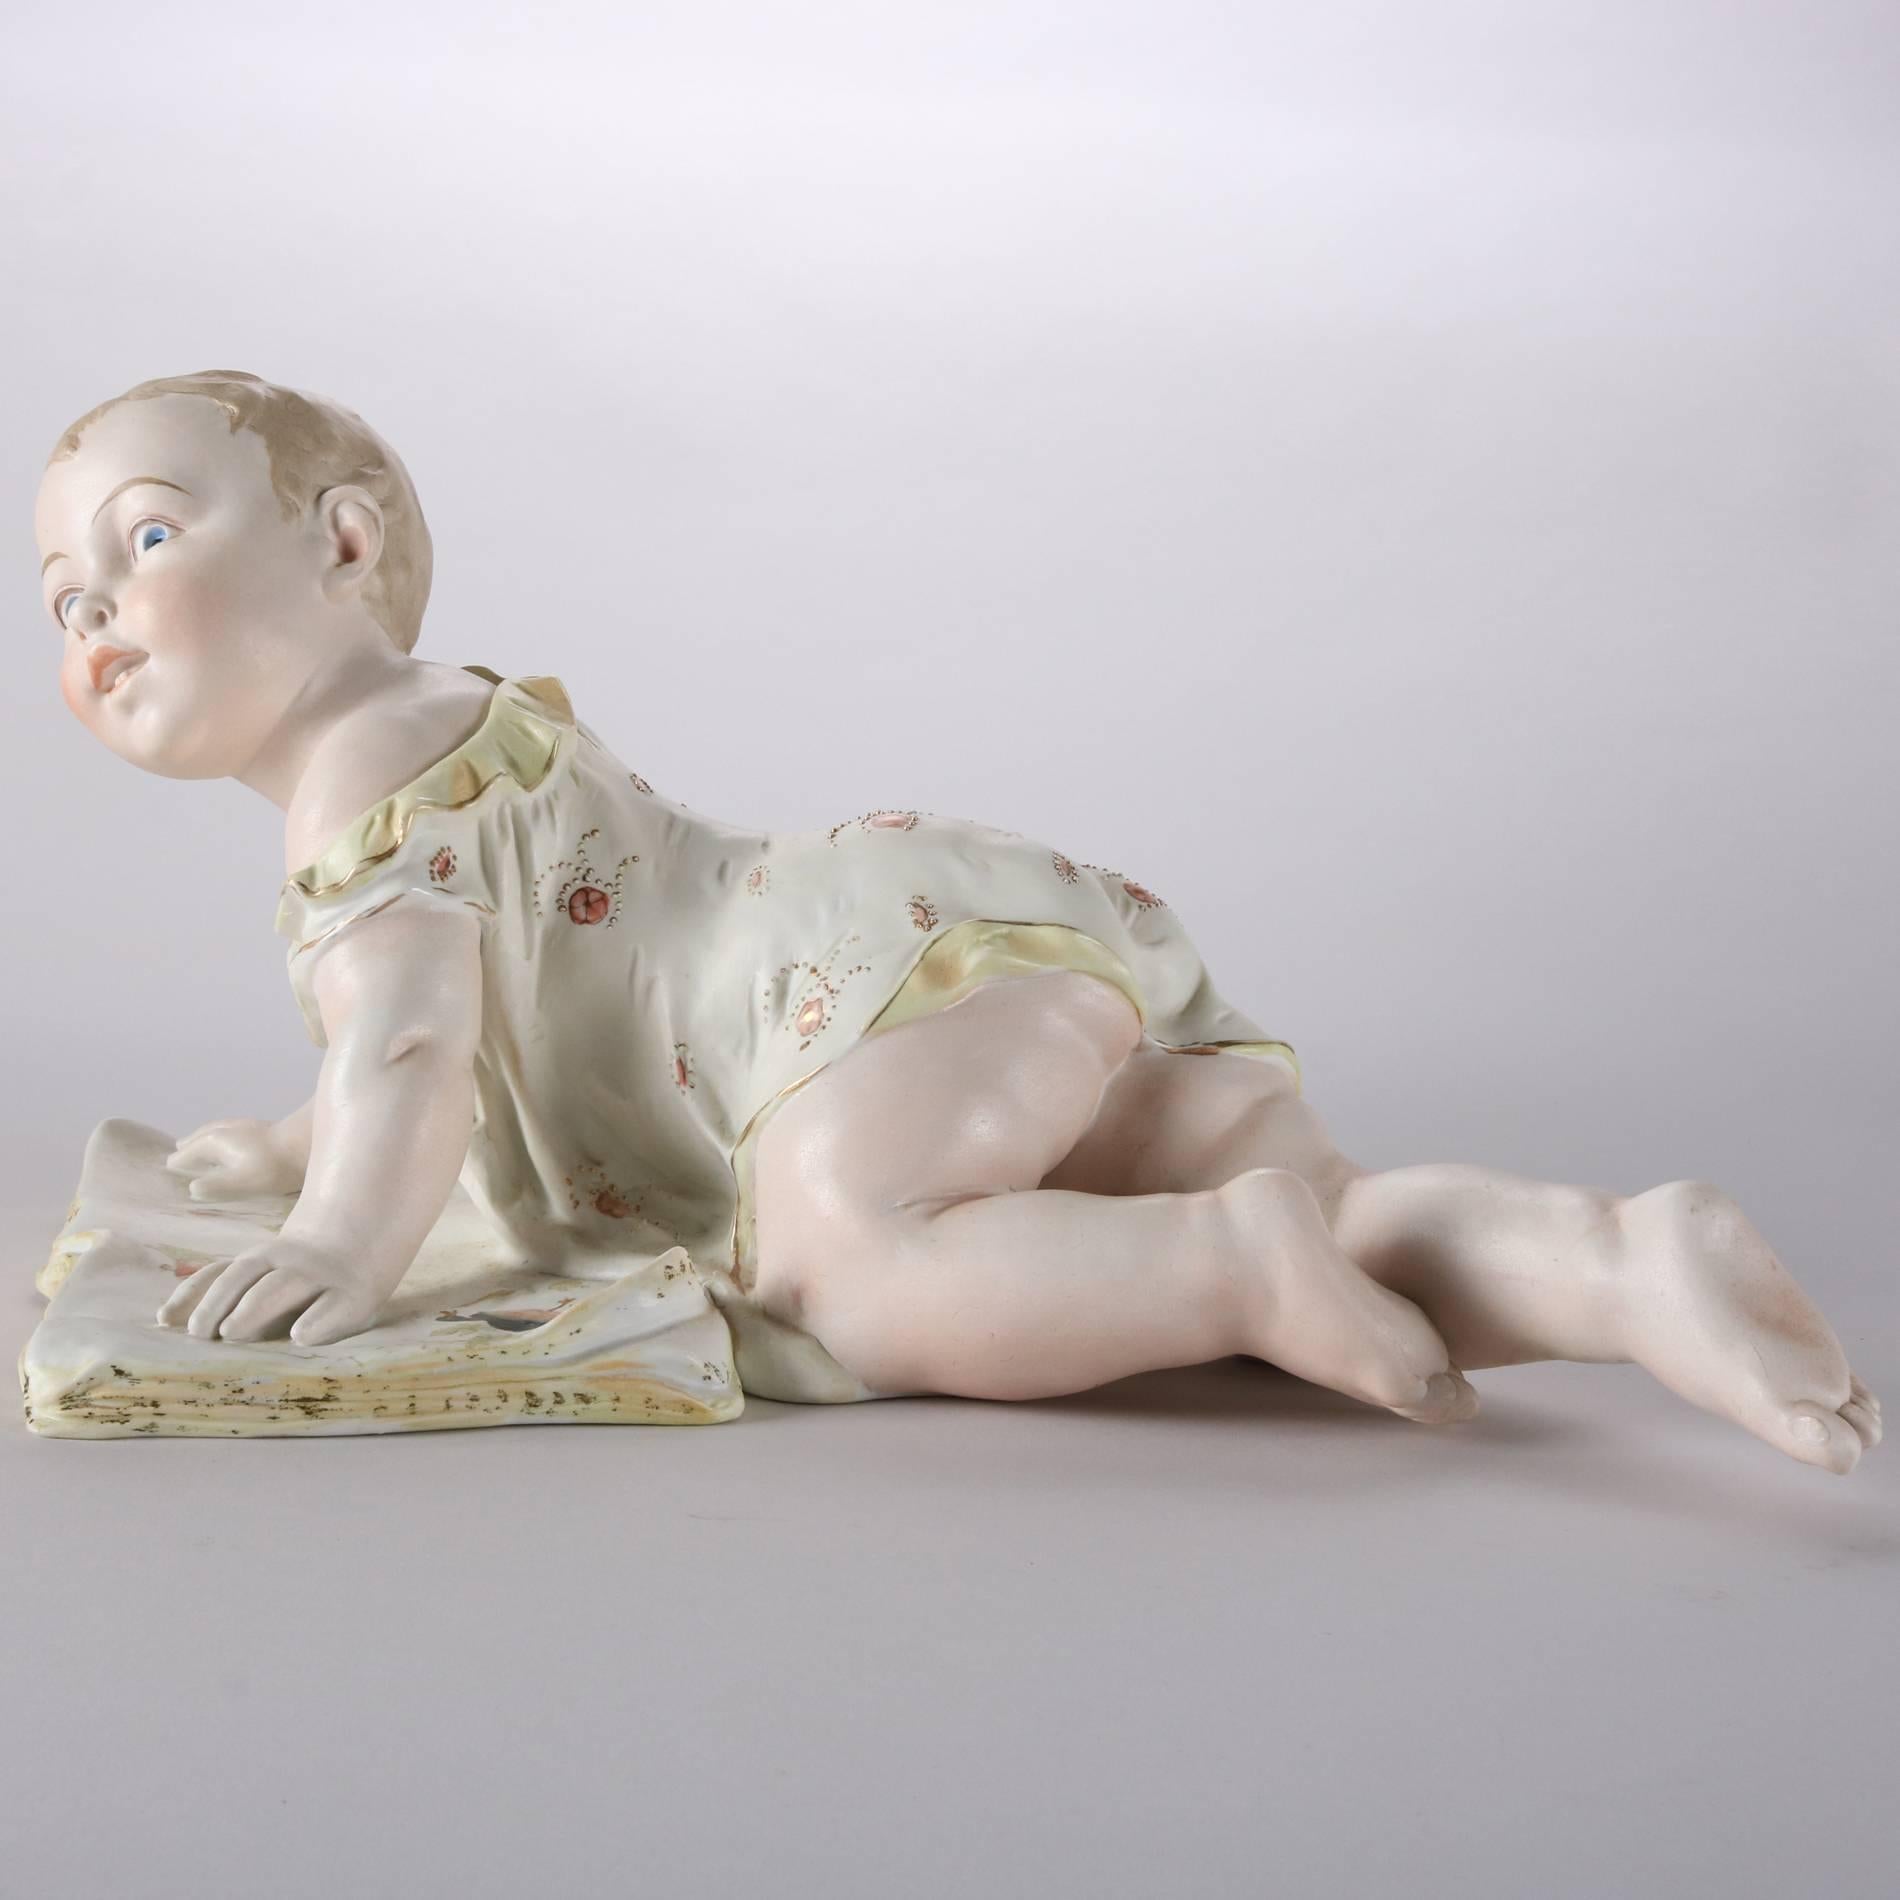 European Antique Large English Painted & Gilt Bisque Porcelain Piano Baby, 19th Century